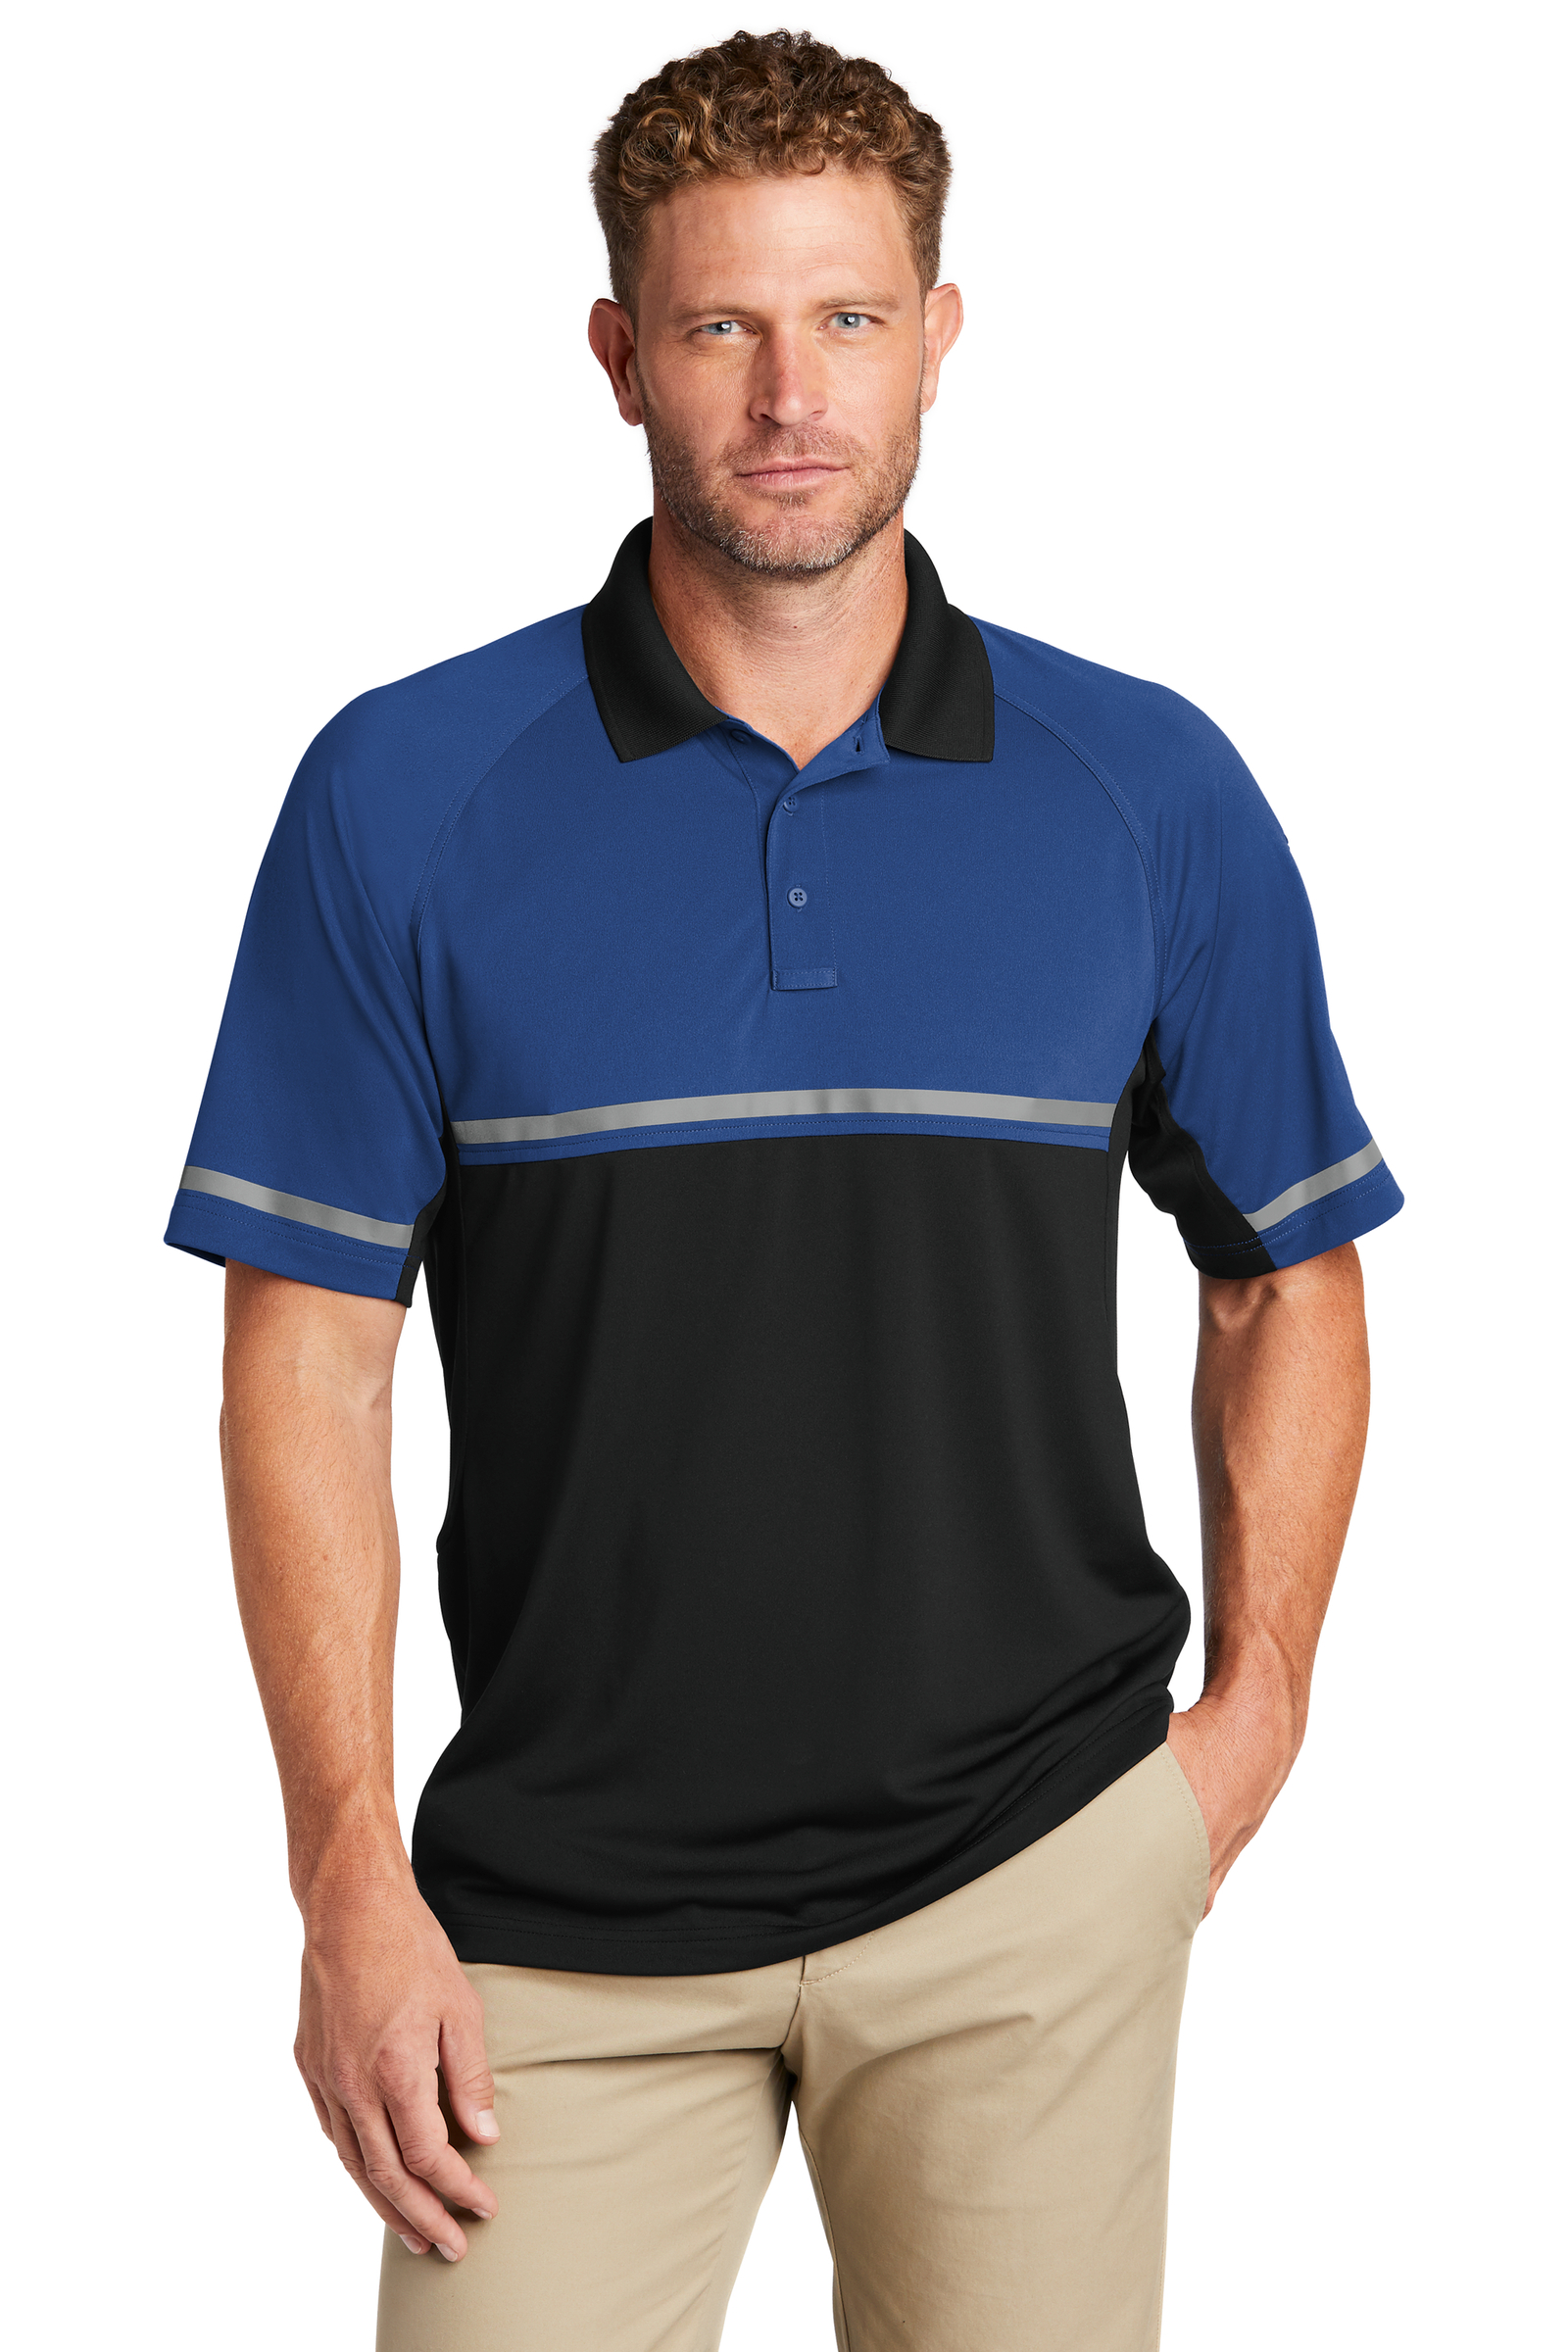 CornerStone Embroidered Men's Select Lightweight Enhanced Visibility Polo